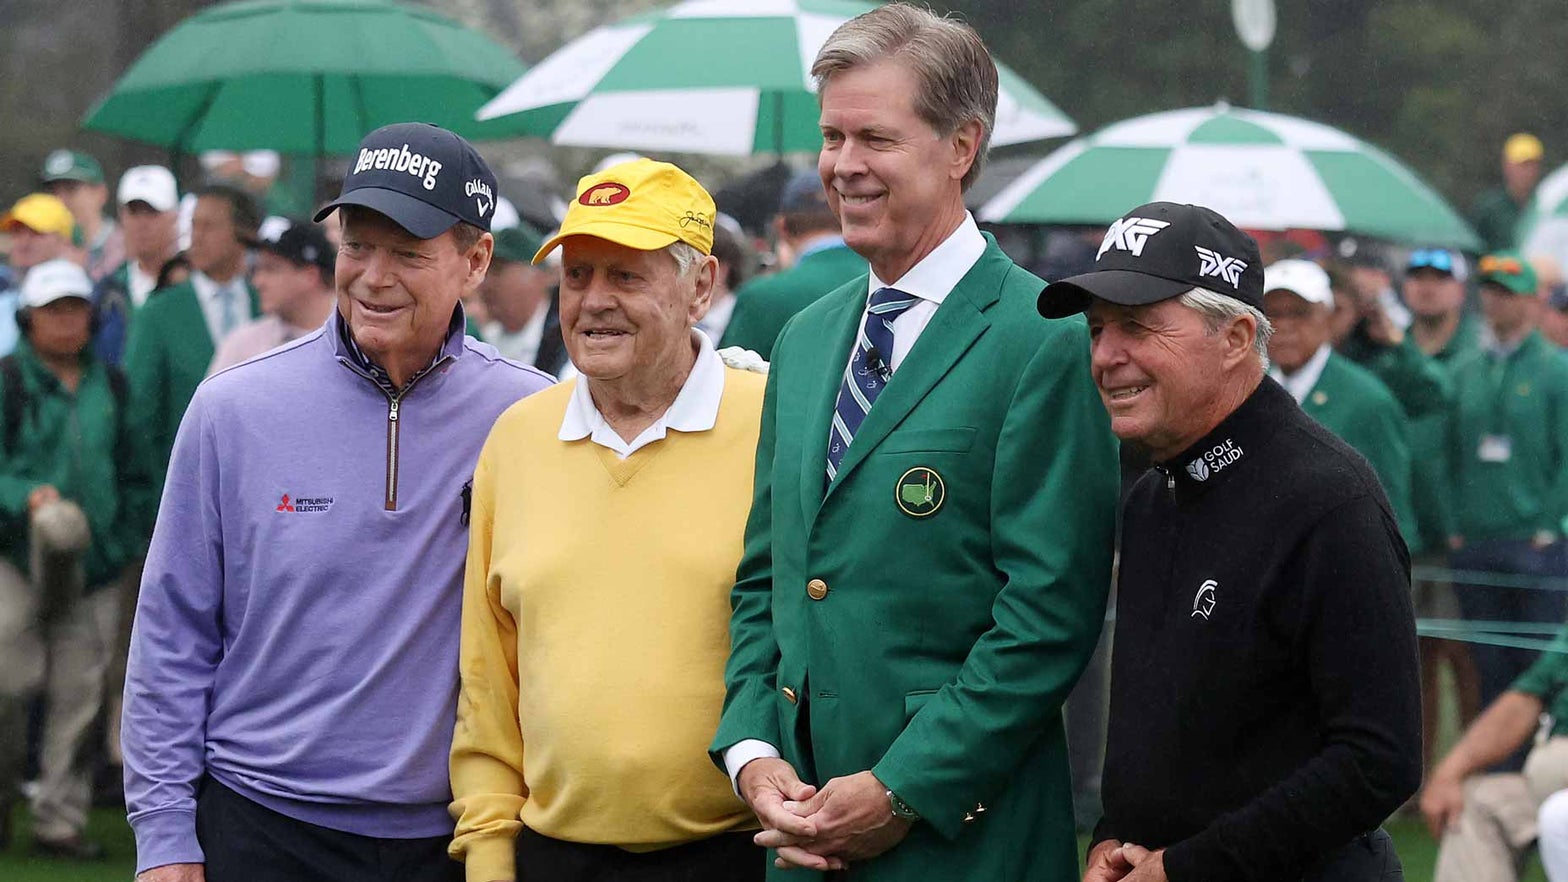 Watch Nicklaus, Player, Watson hit Masters ceremonial opening tee shots